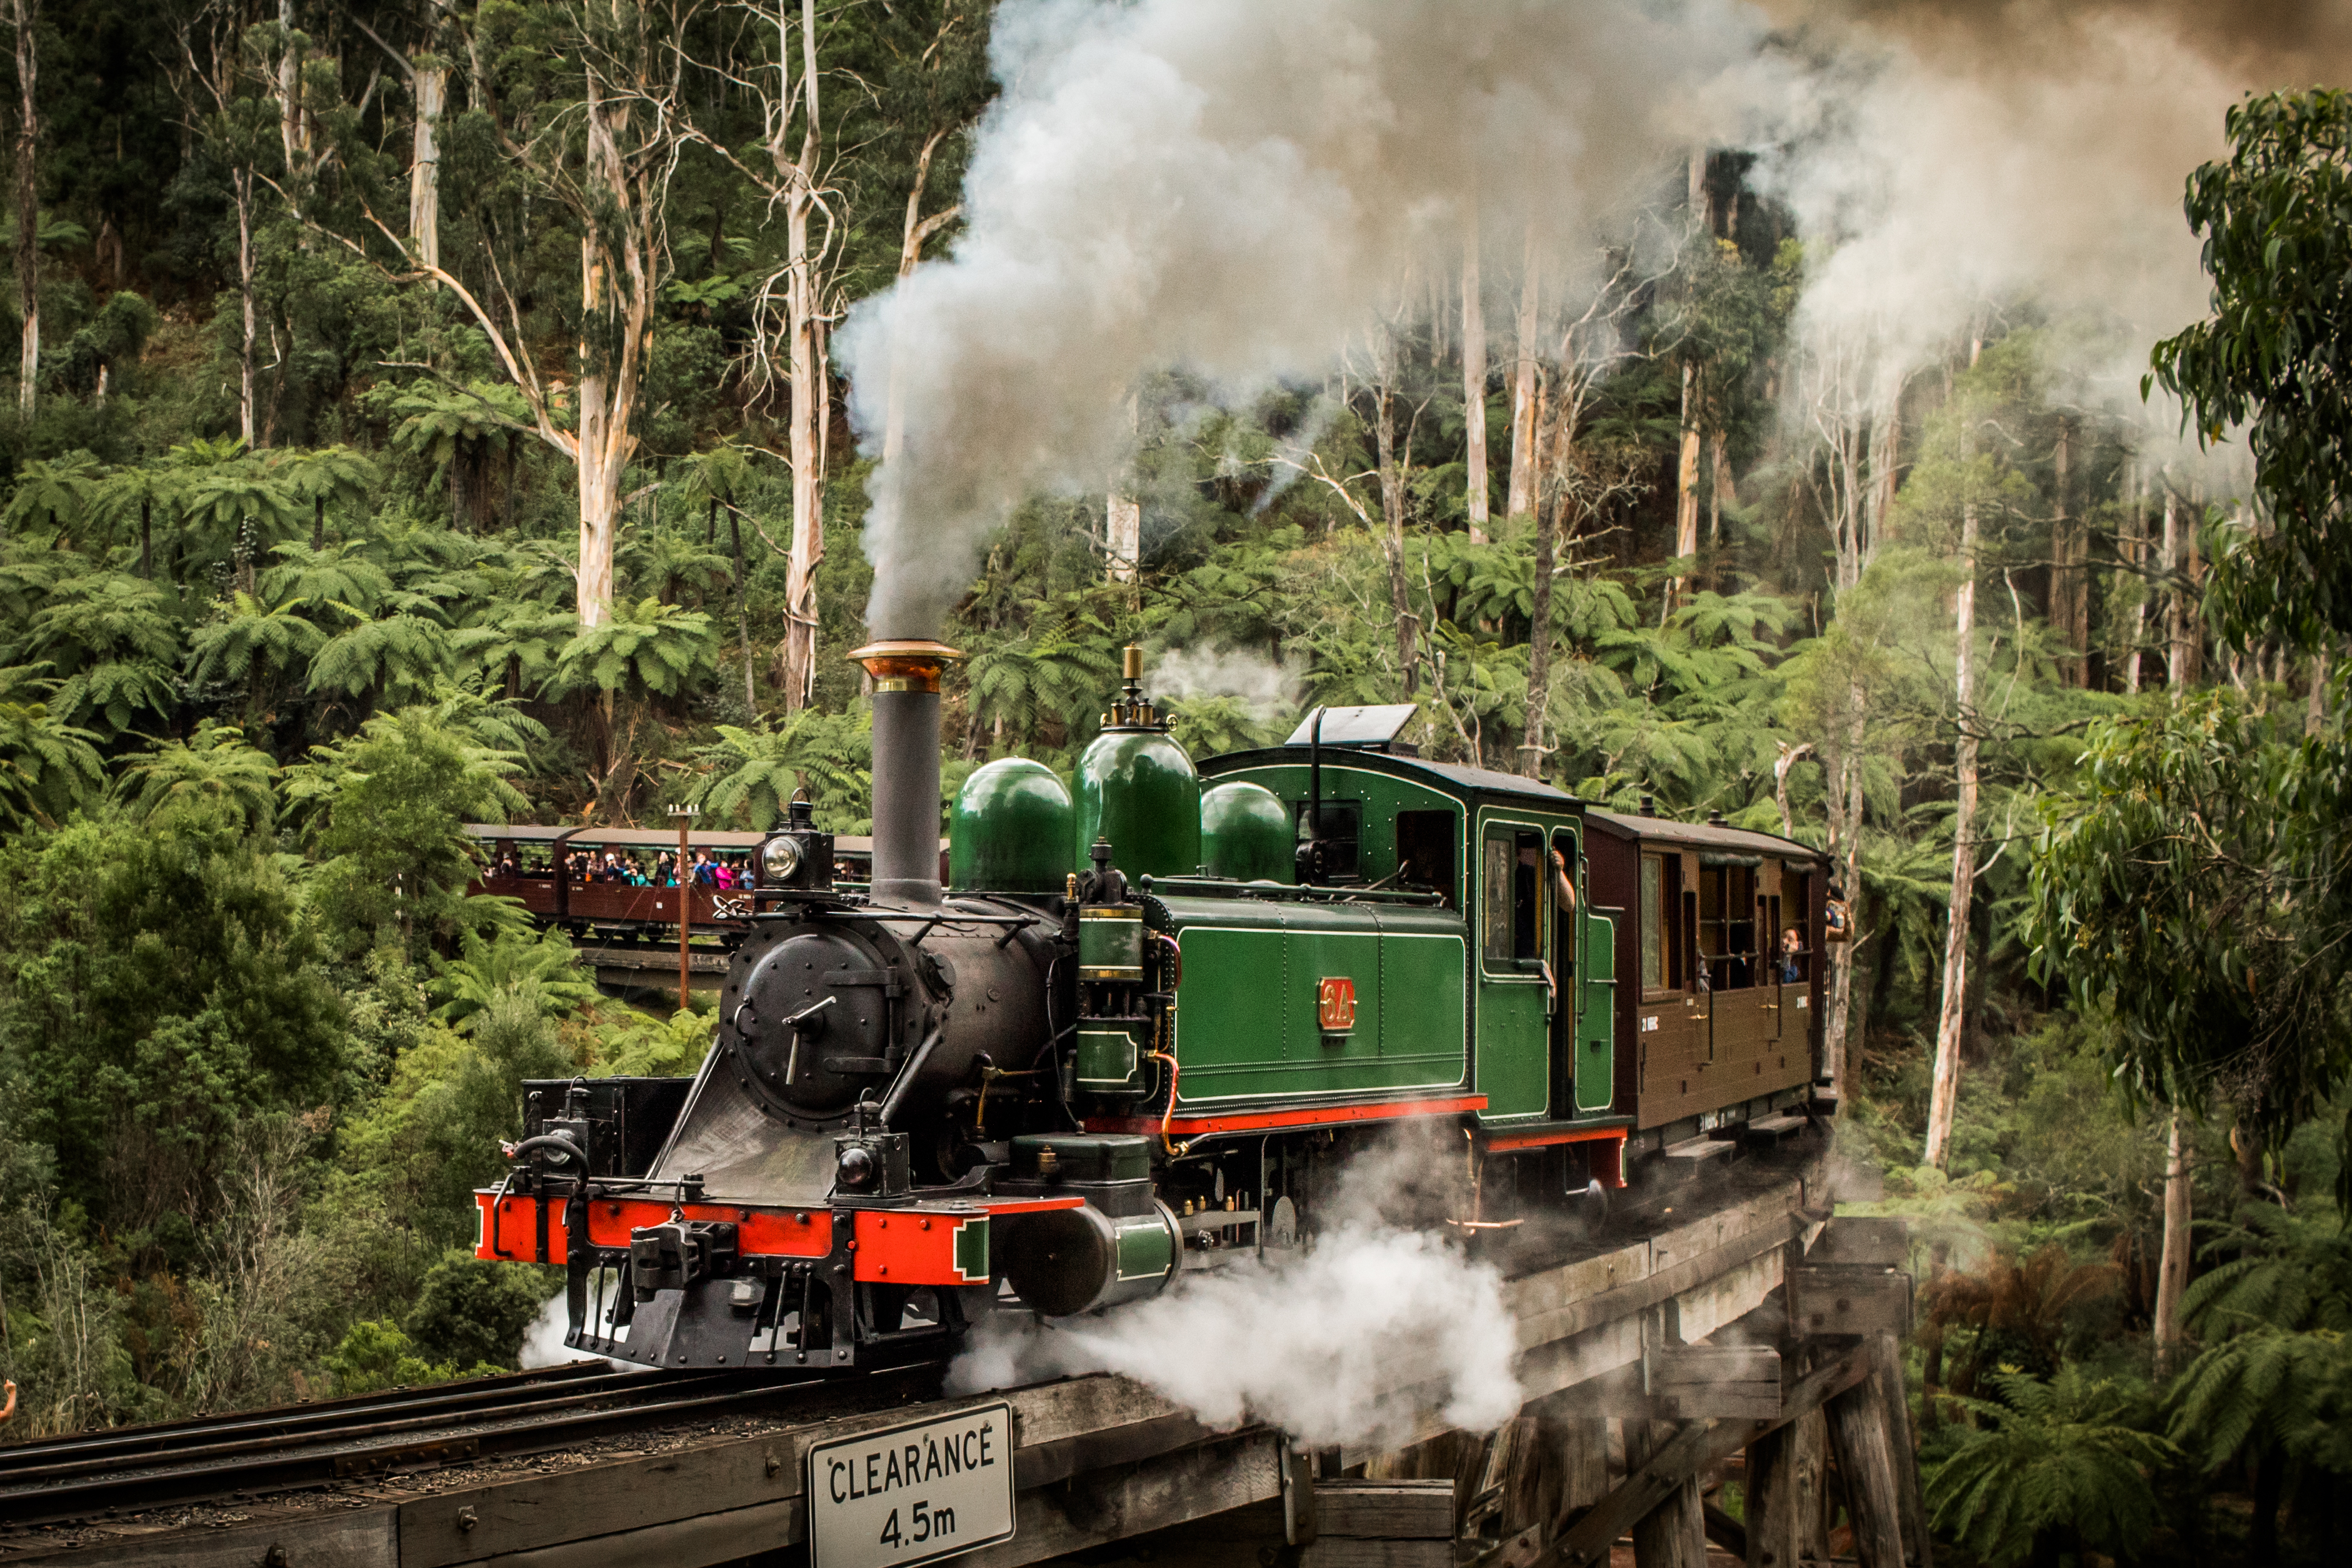 2 Puffing Billy Crossing The Famous Monbulk Trestle Bridge Image By Kahla Webb